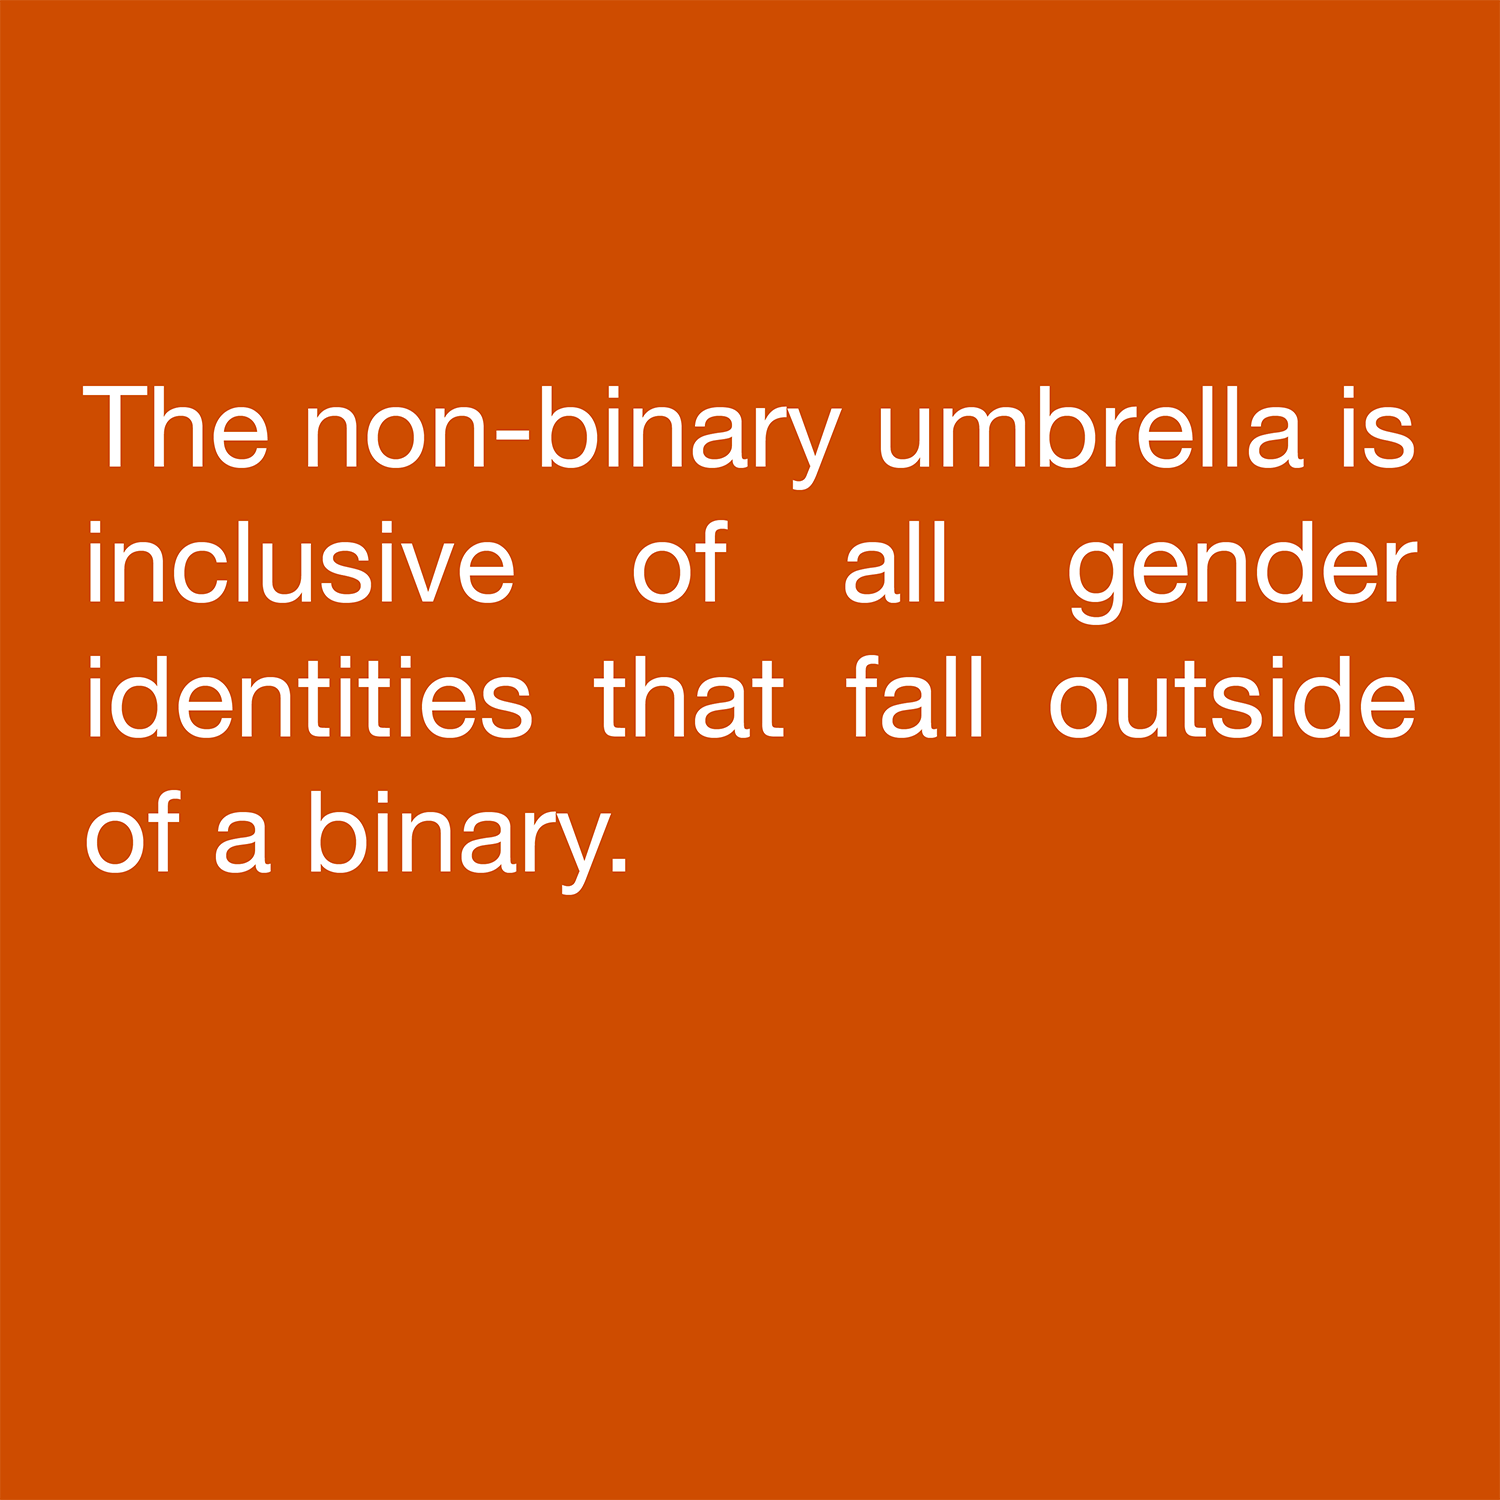  The non-binary umbrella is inclusive of all gender identities that fall outside of a binary. 